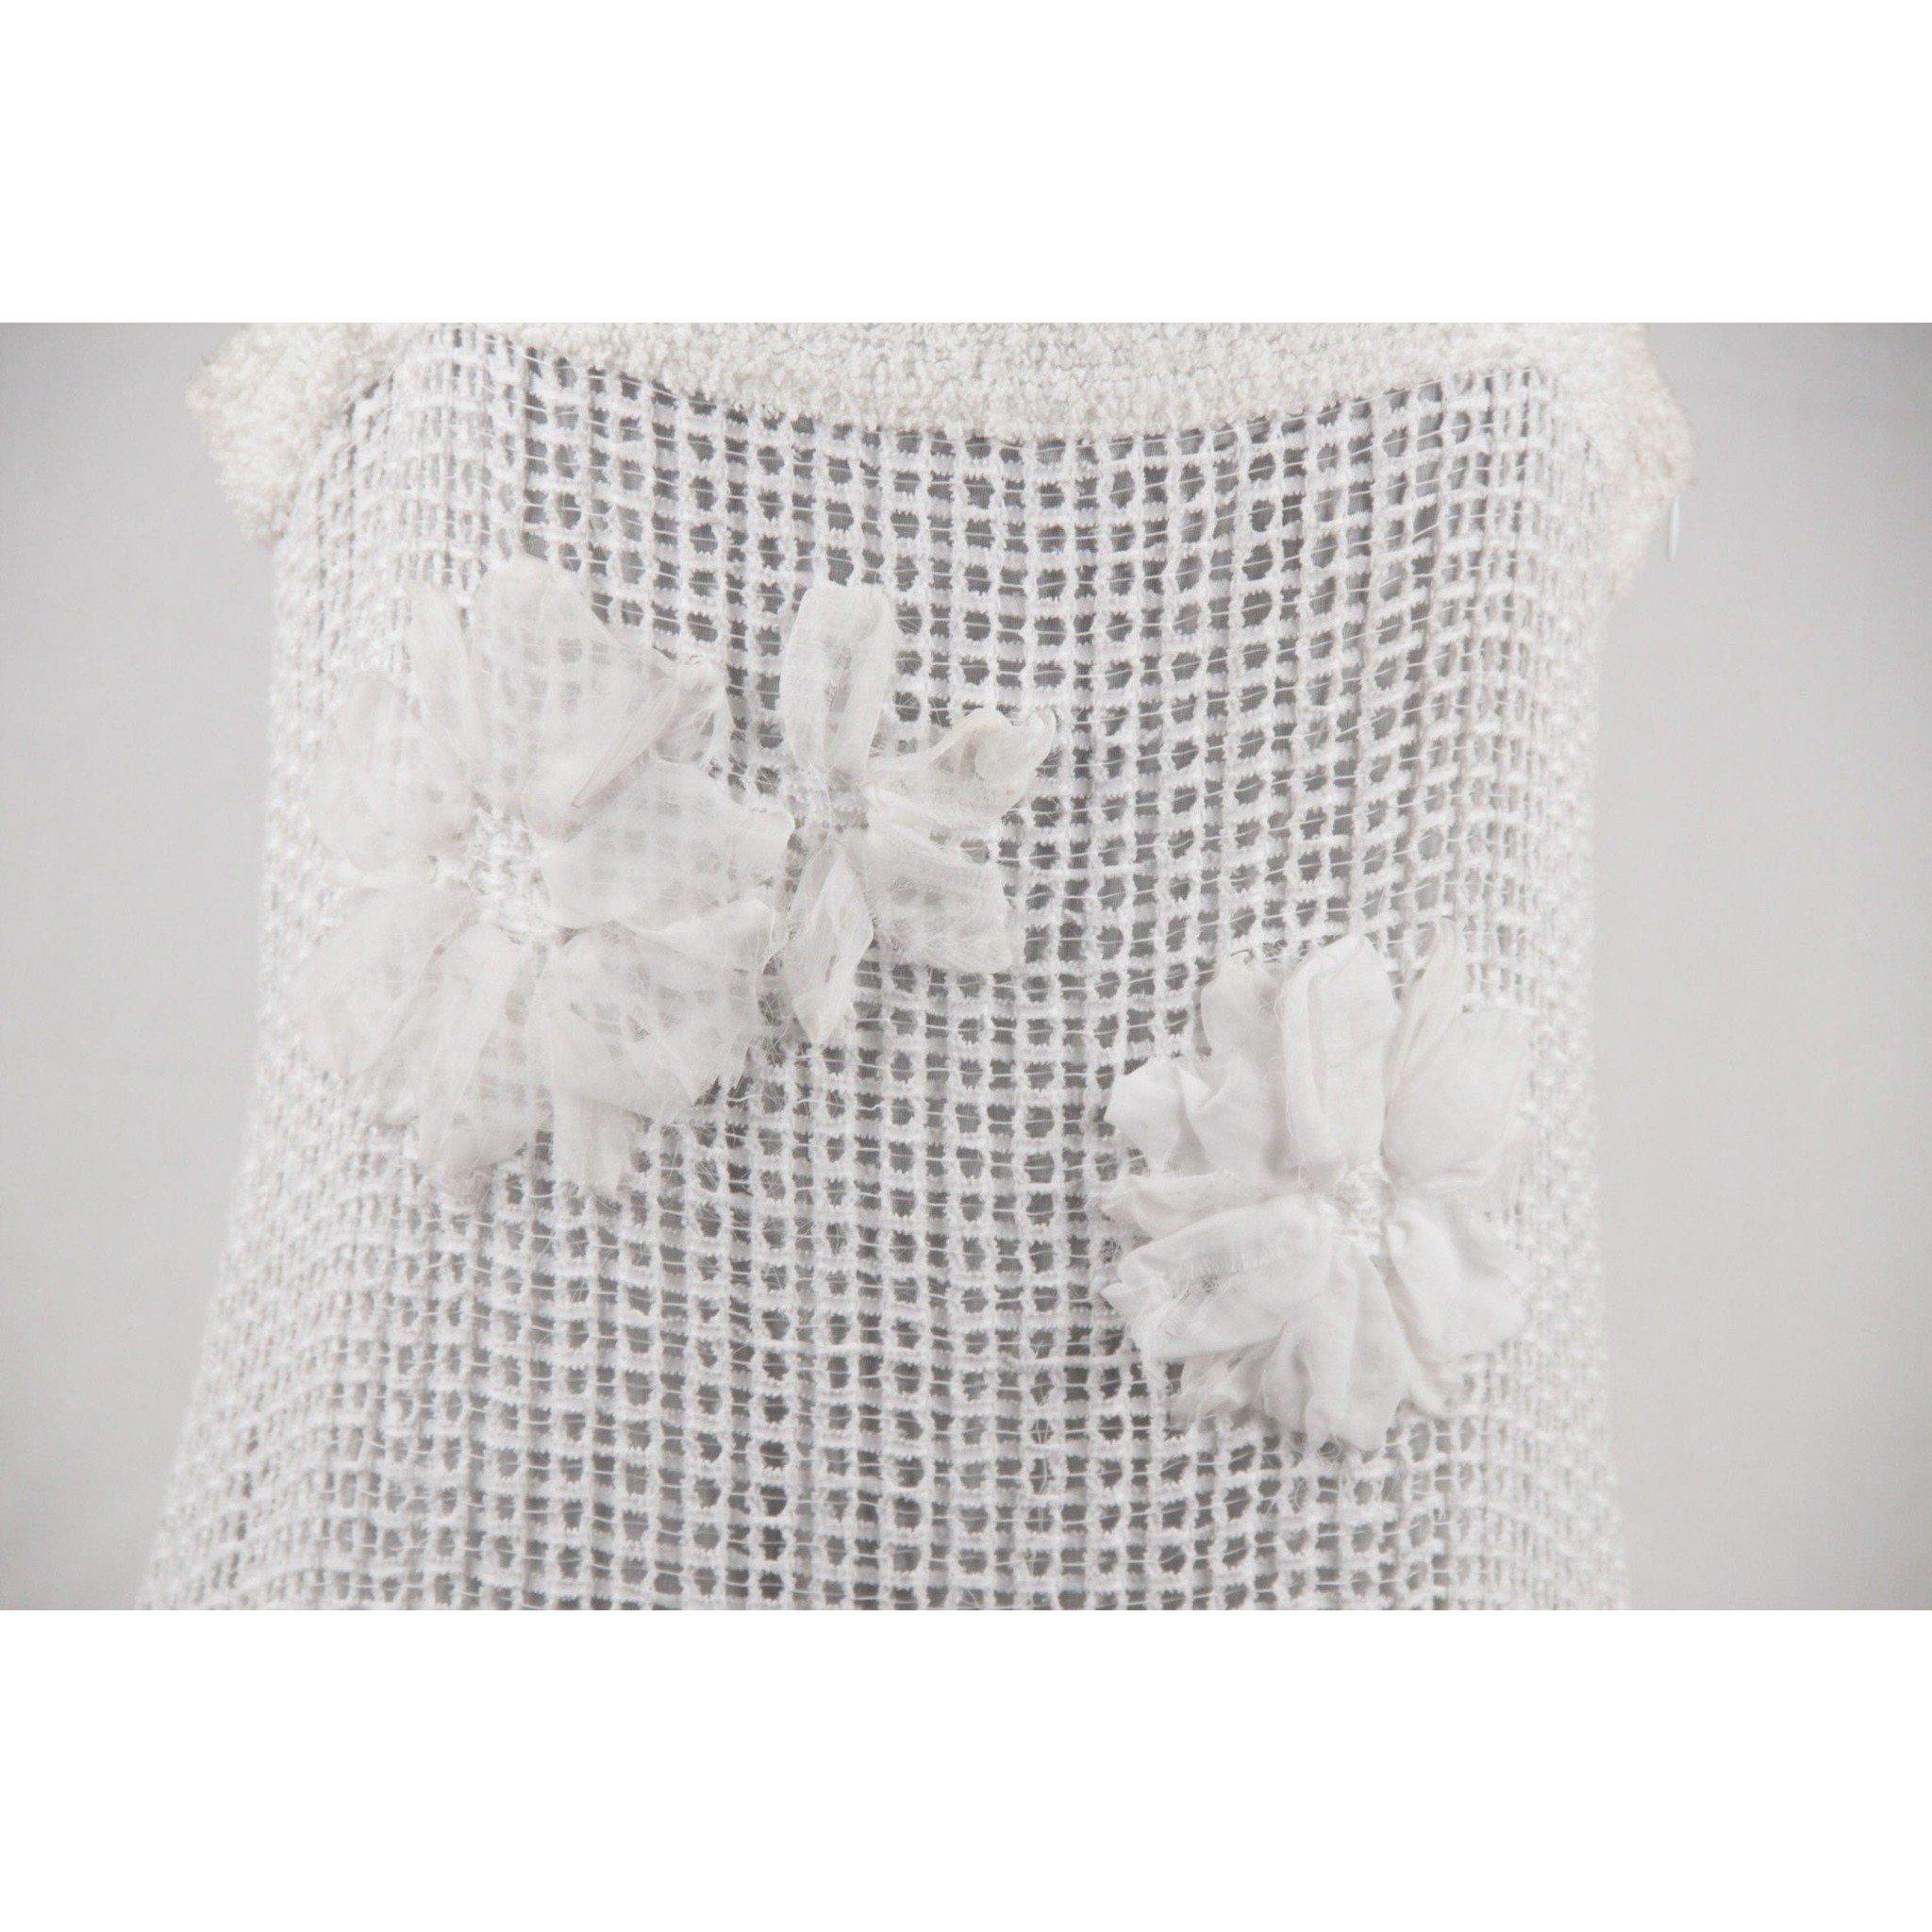 Description Chanel White Pure Cotton Sleeveless Shift Dress - Flower appliques on the front - Fringed Hem - 100% Cotton lining. Fabric / Material: 100% Cotton. Color / Effect: White / perforated fabric fully lined. Main closure: Side zip closure.